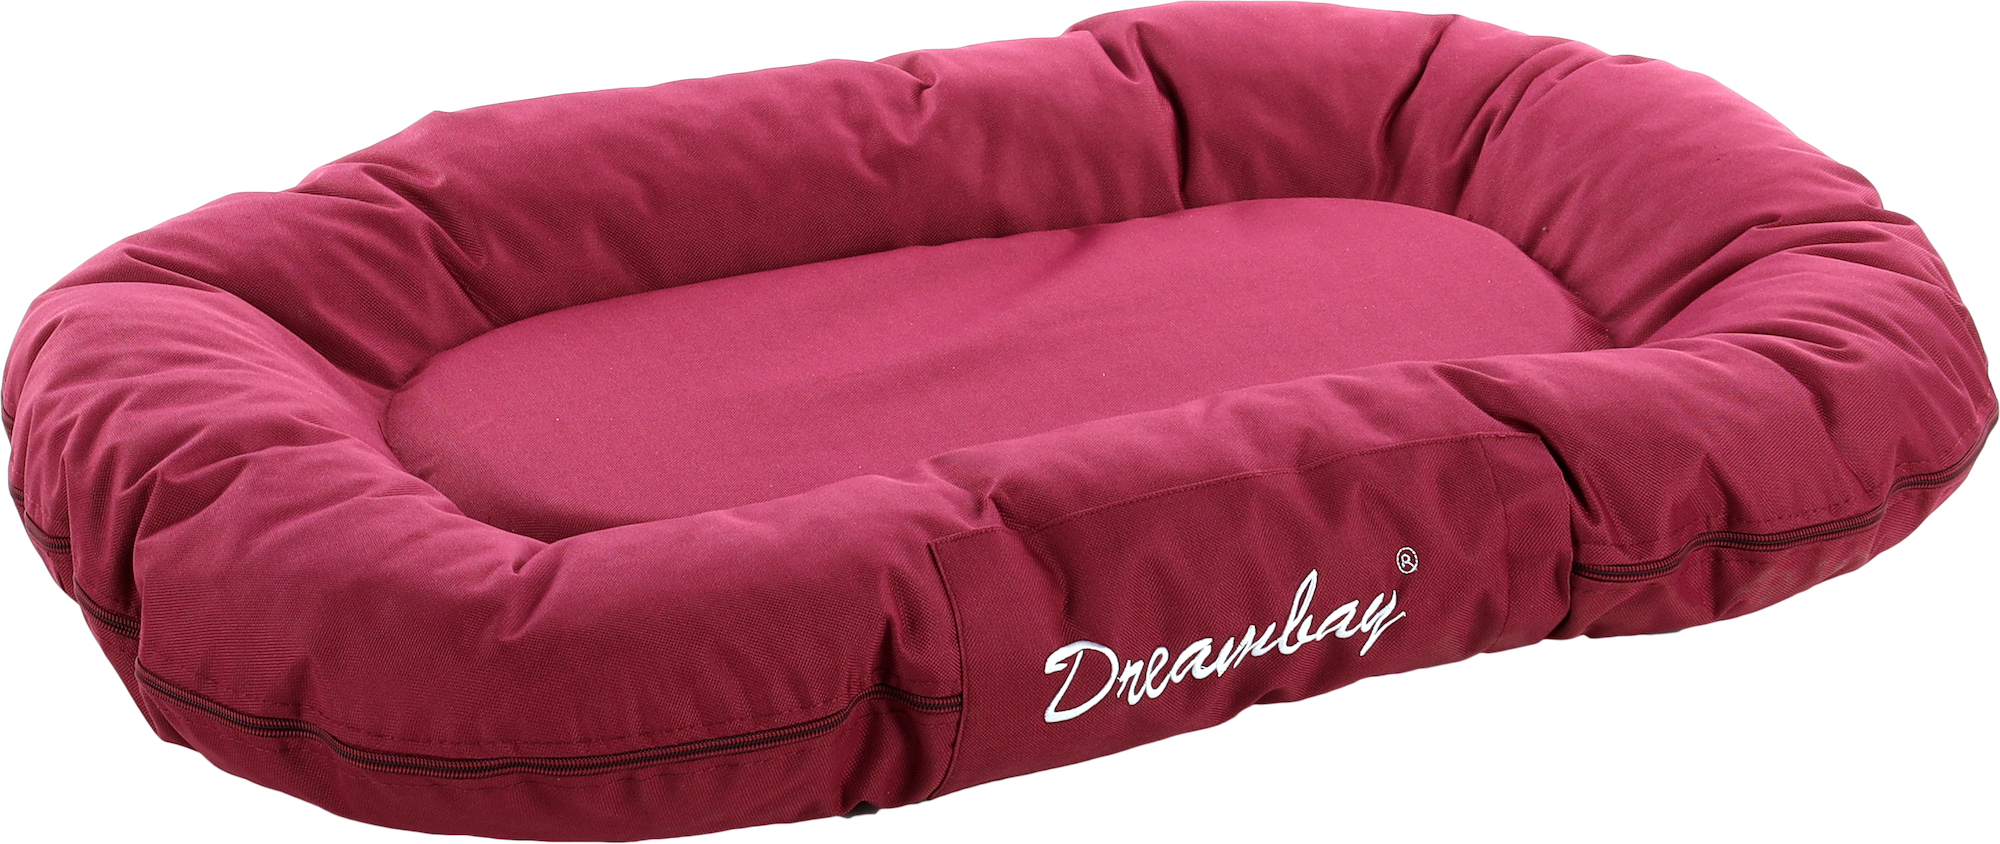 diverses tailles NEUF Flamingo Chiens Coussin Dreambay ovale Shadow 